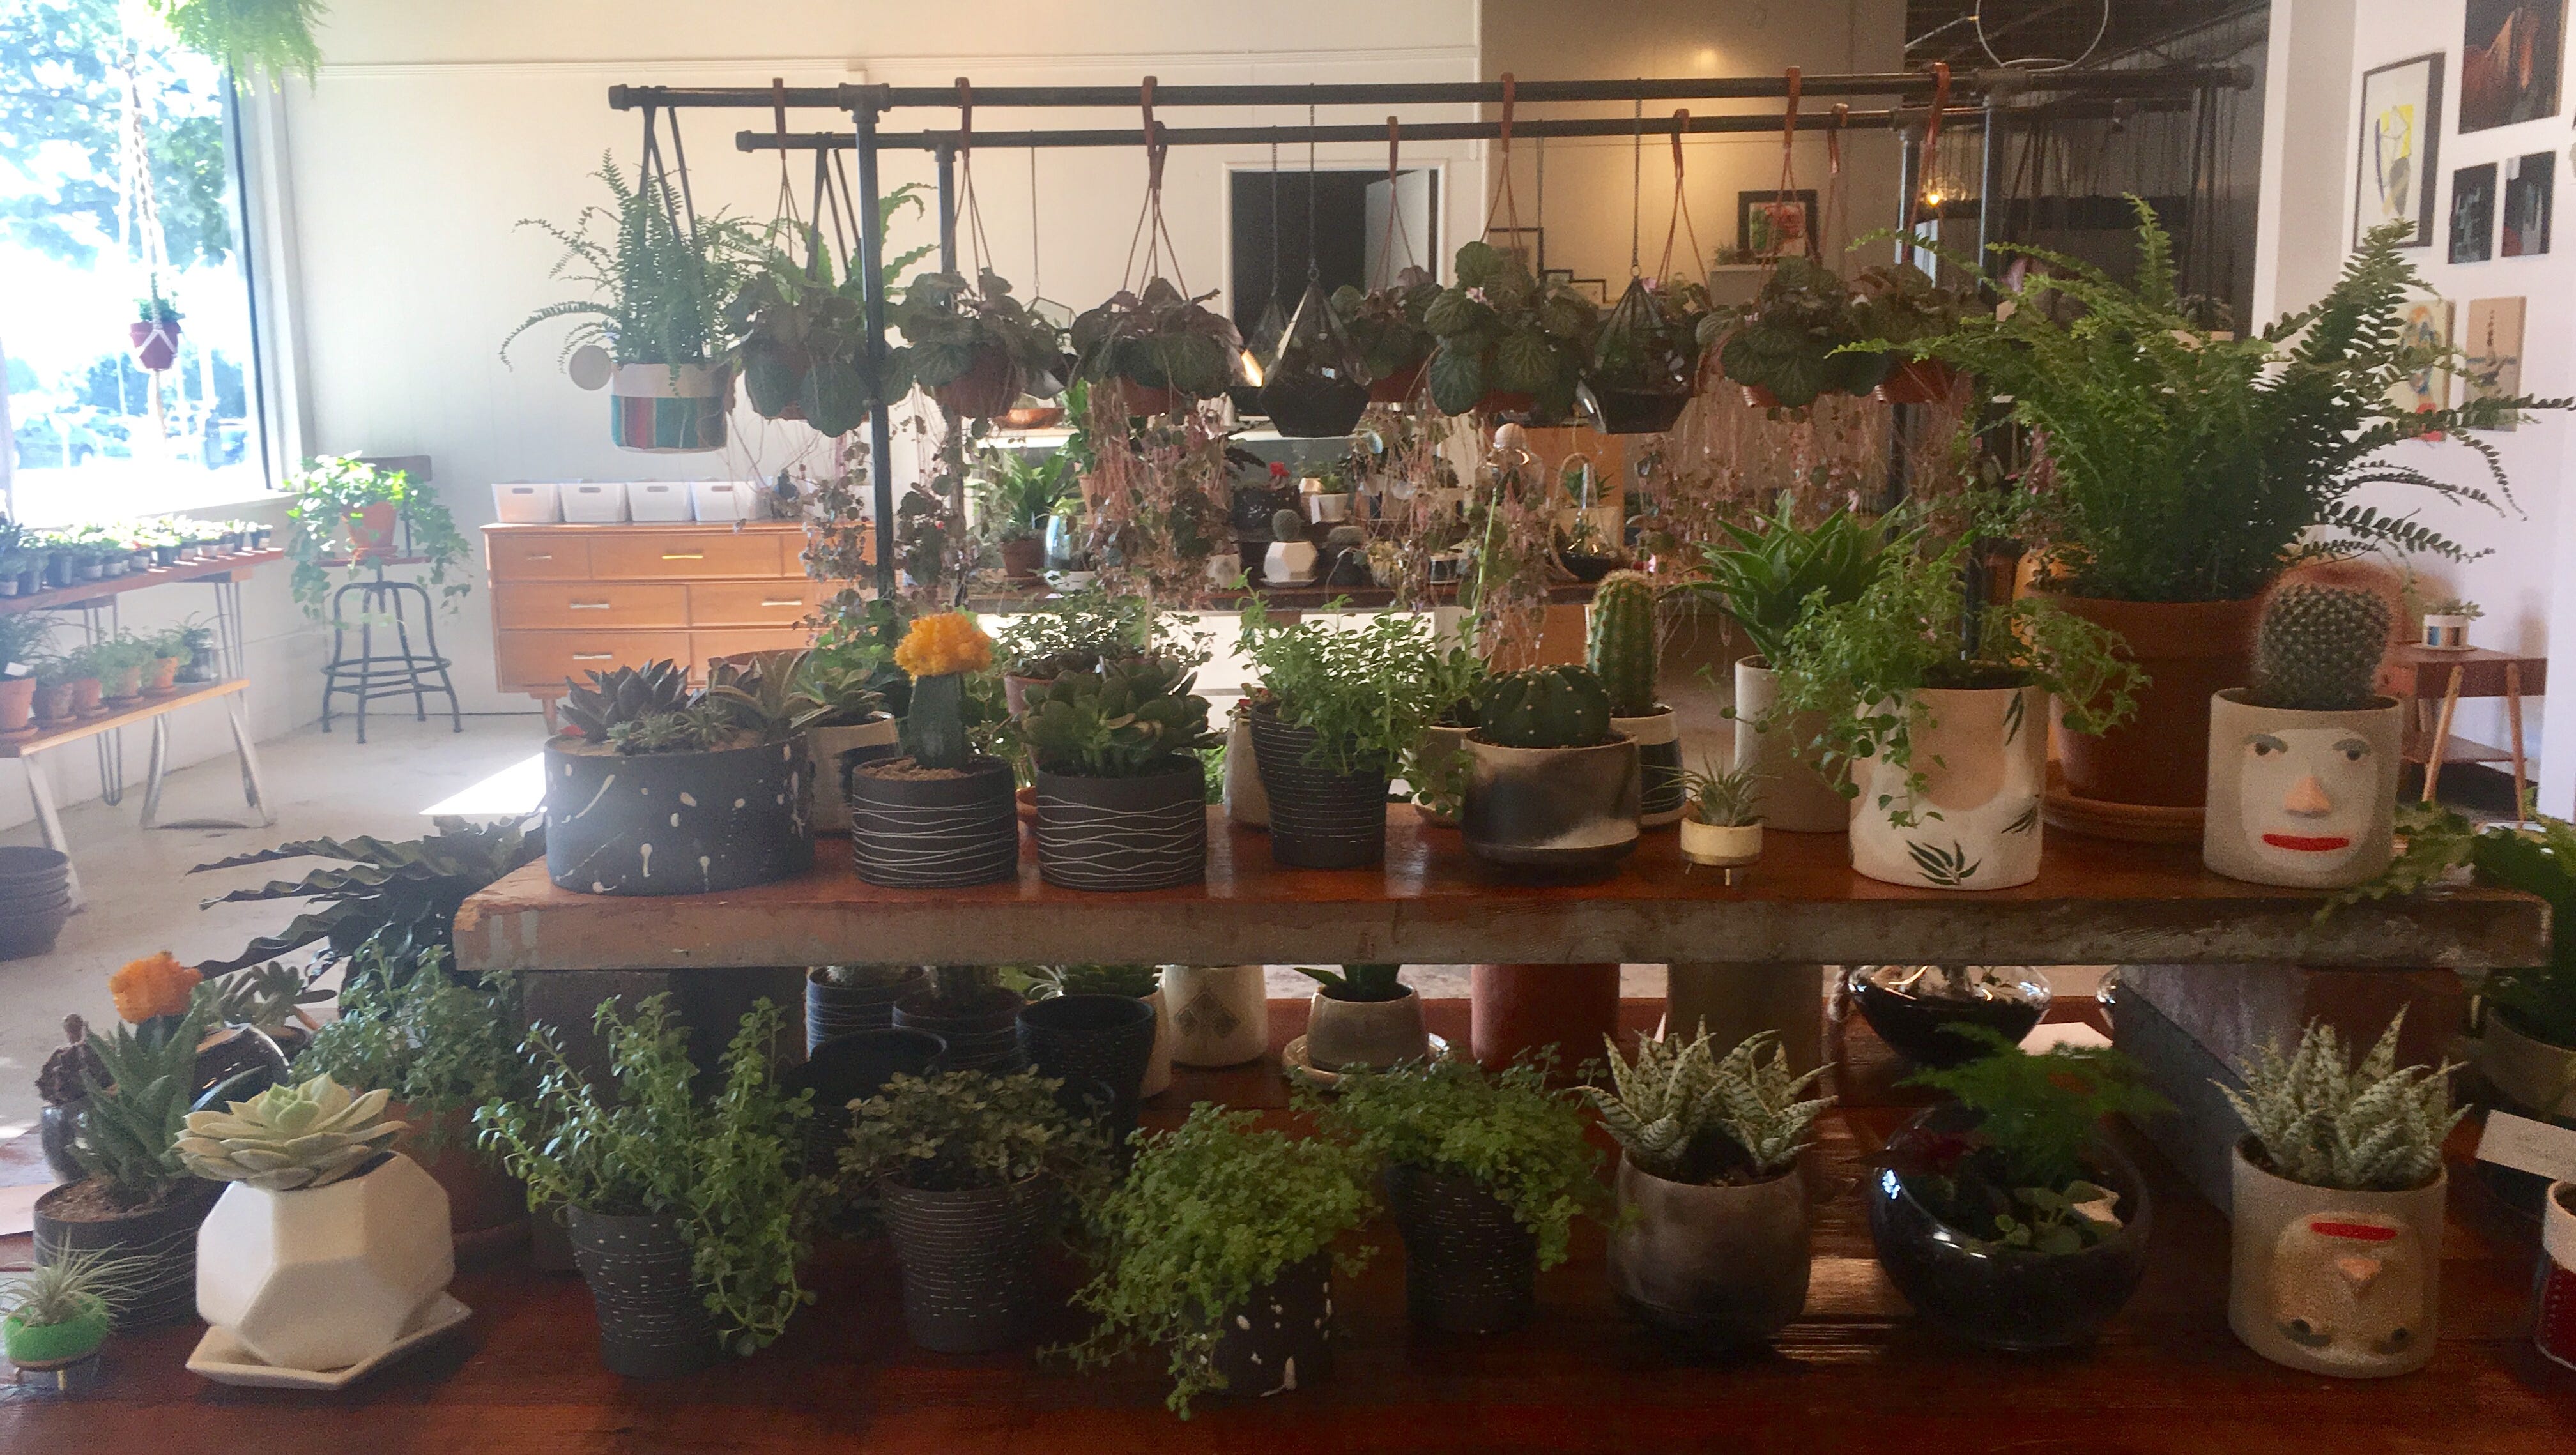 A store selling terrariums, plants and art has opened in downtown Des Moines.